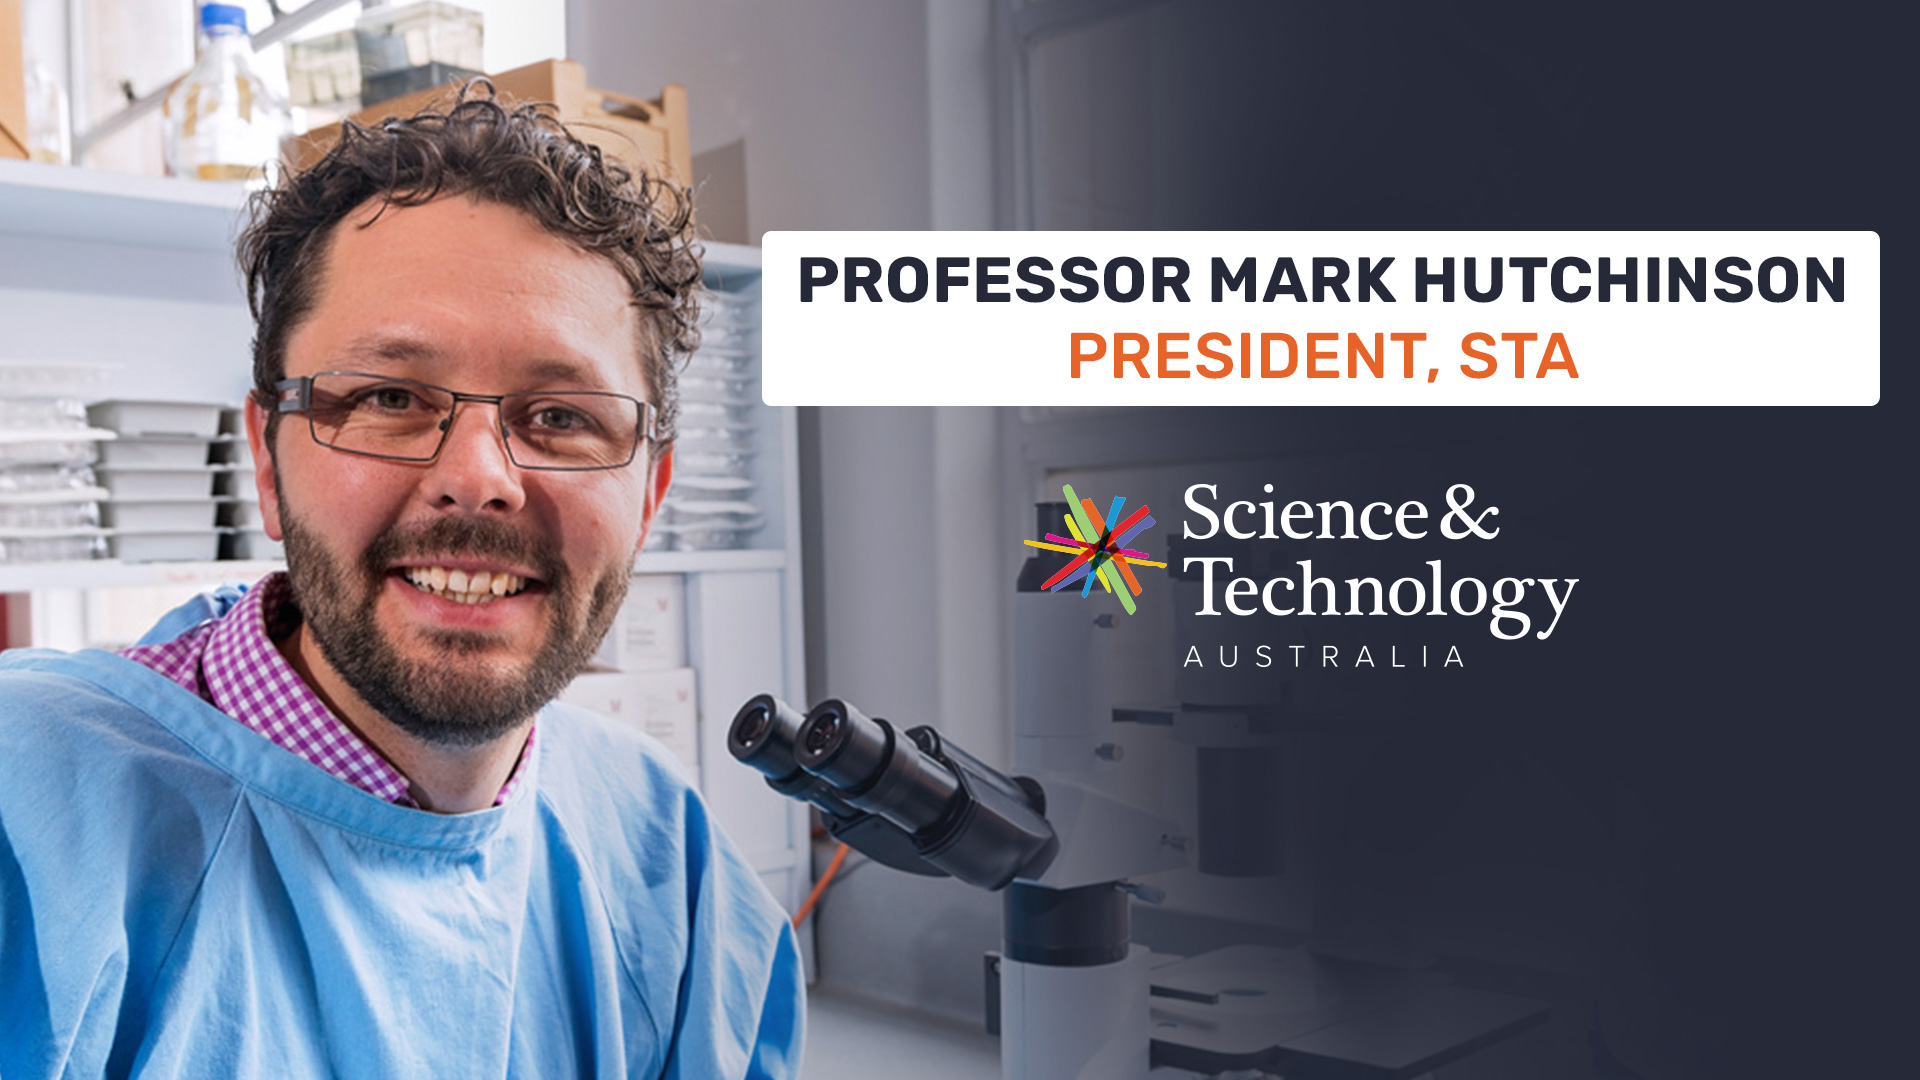 Science & Technology Australia welcomes the appointment of STA President Professor Mark Hutchinson to a panel of three eminent Australians reviewing the Australian Research Council’s role and function.